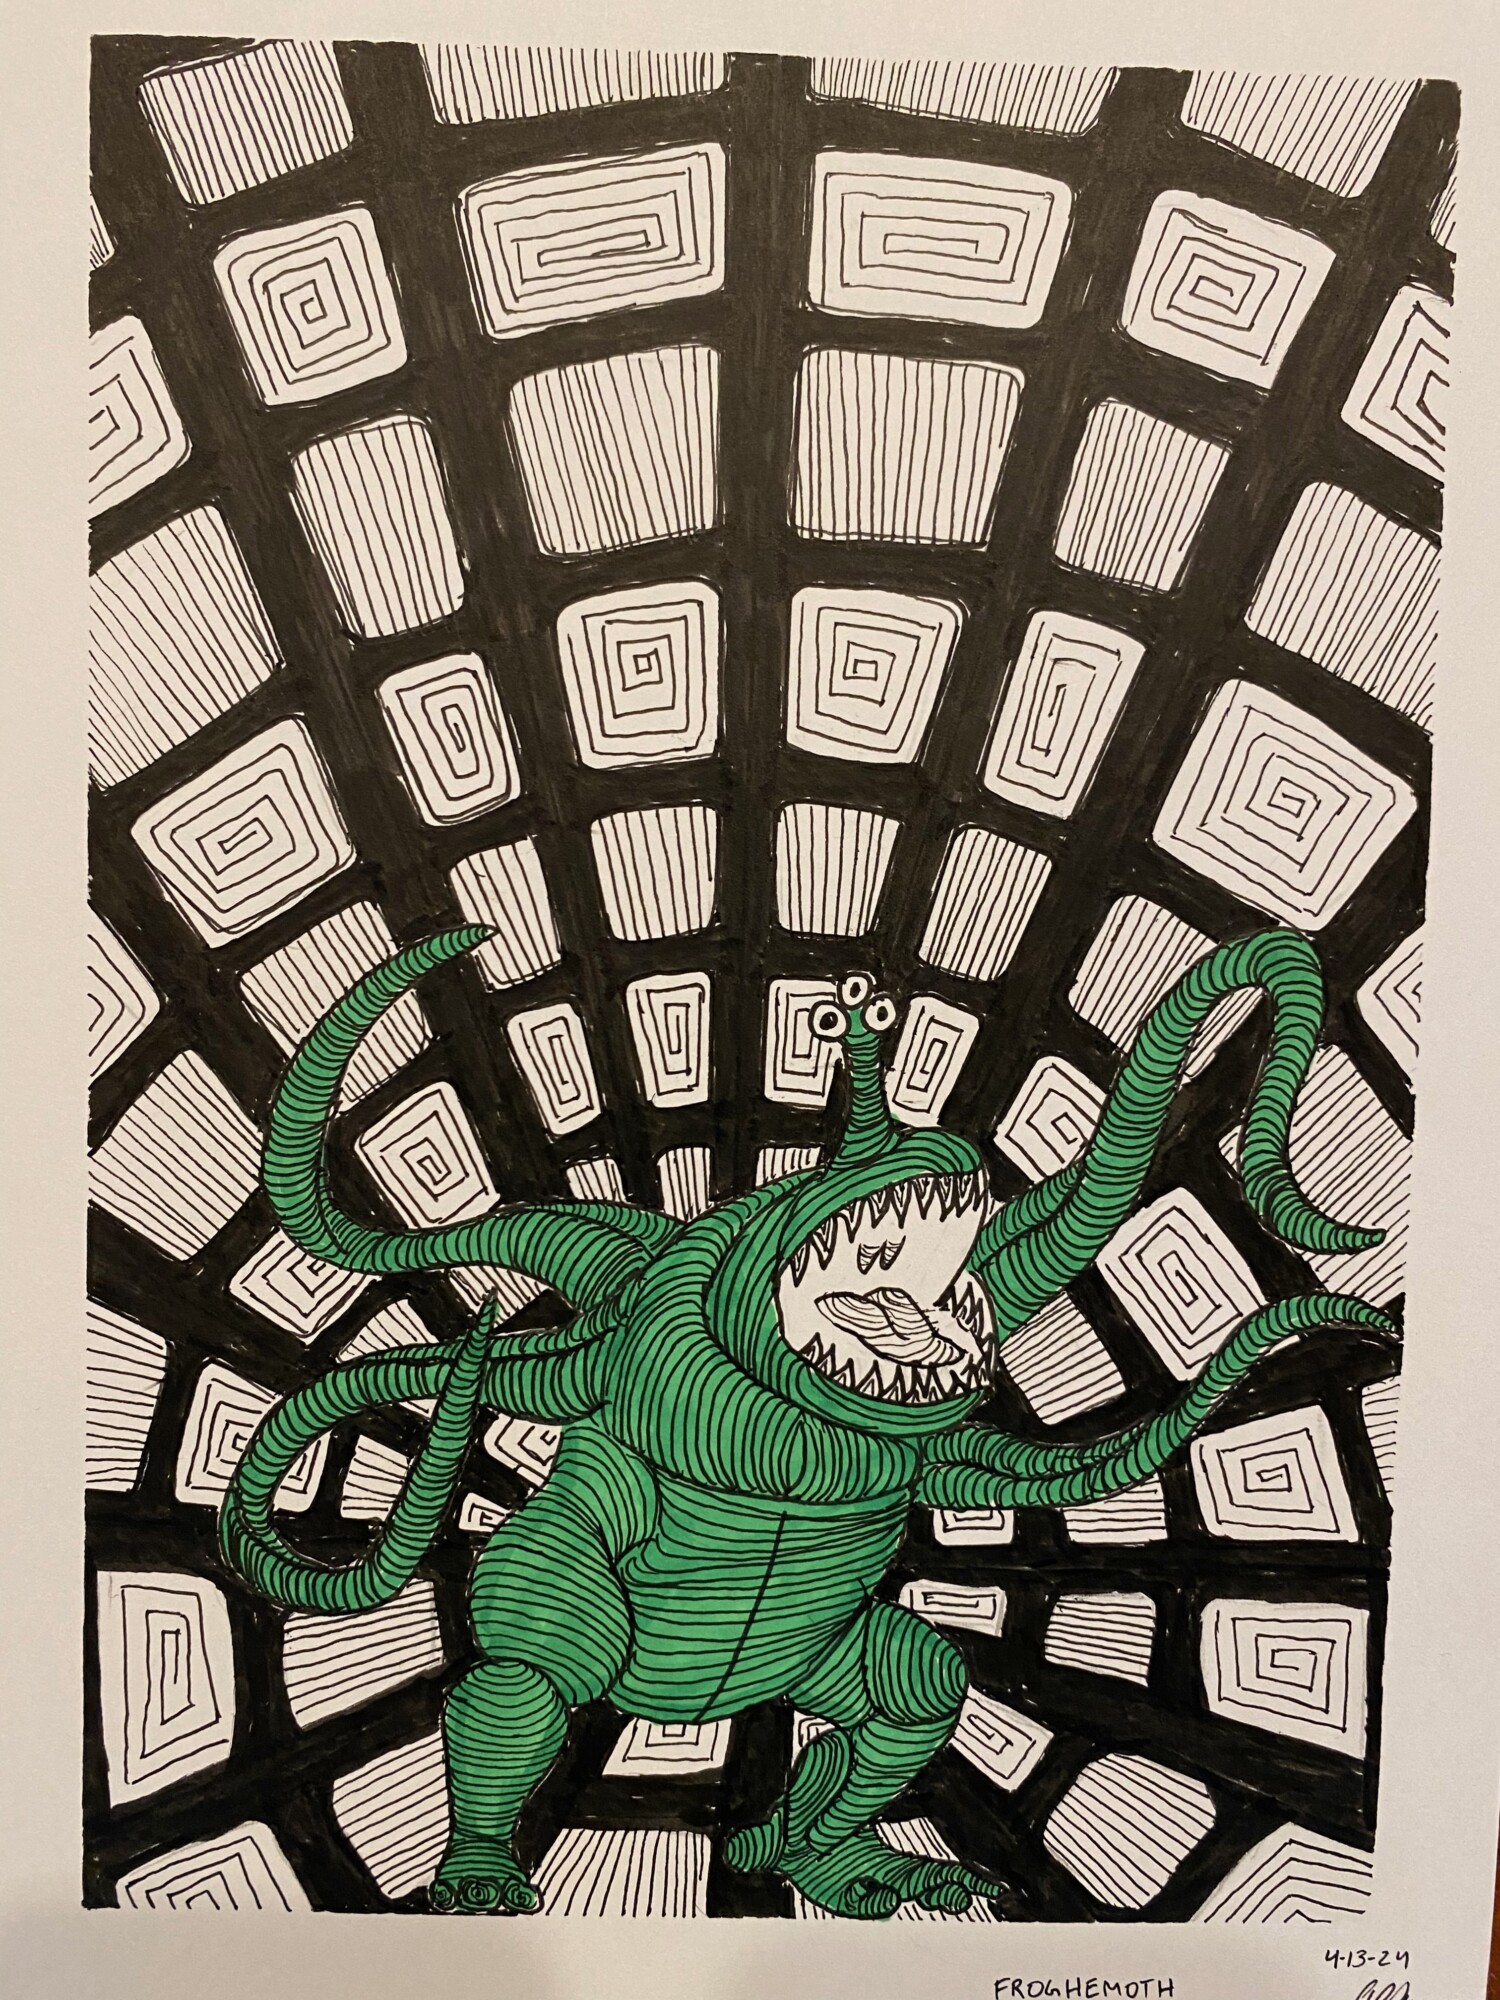 Author’s rendition of the anti-DEI monster (a/k/a Froghemoth from Dungeons & Dragons, a green monster with a frog face and body and multiple tentacles))